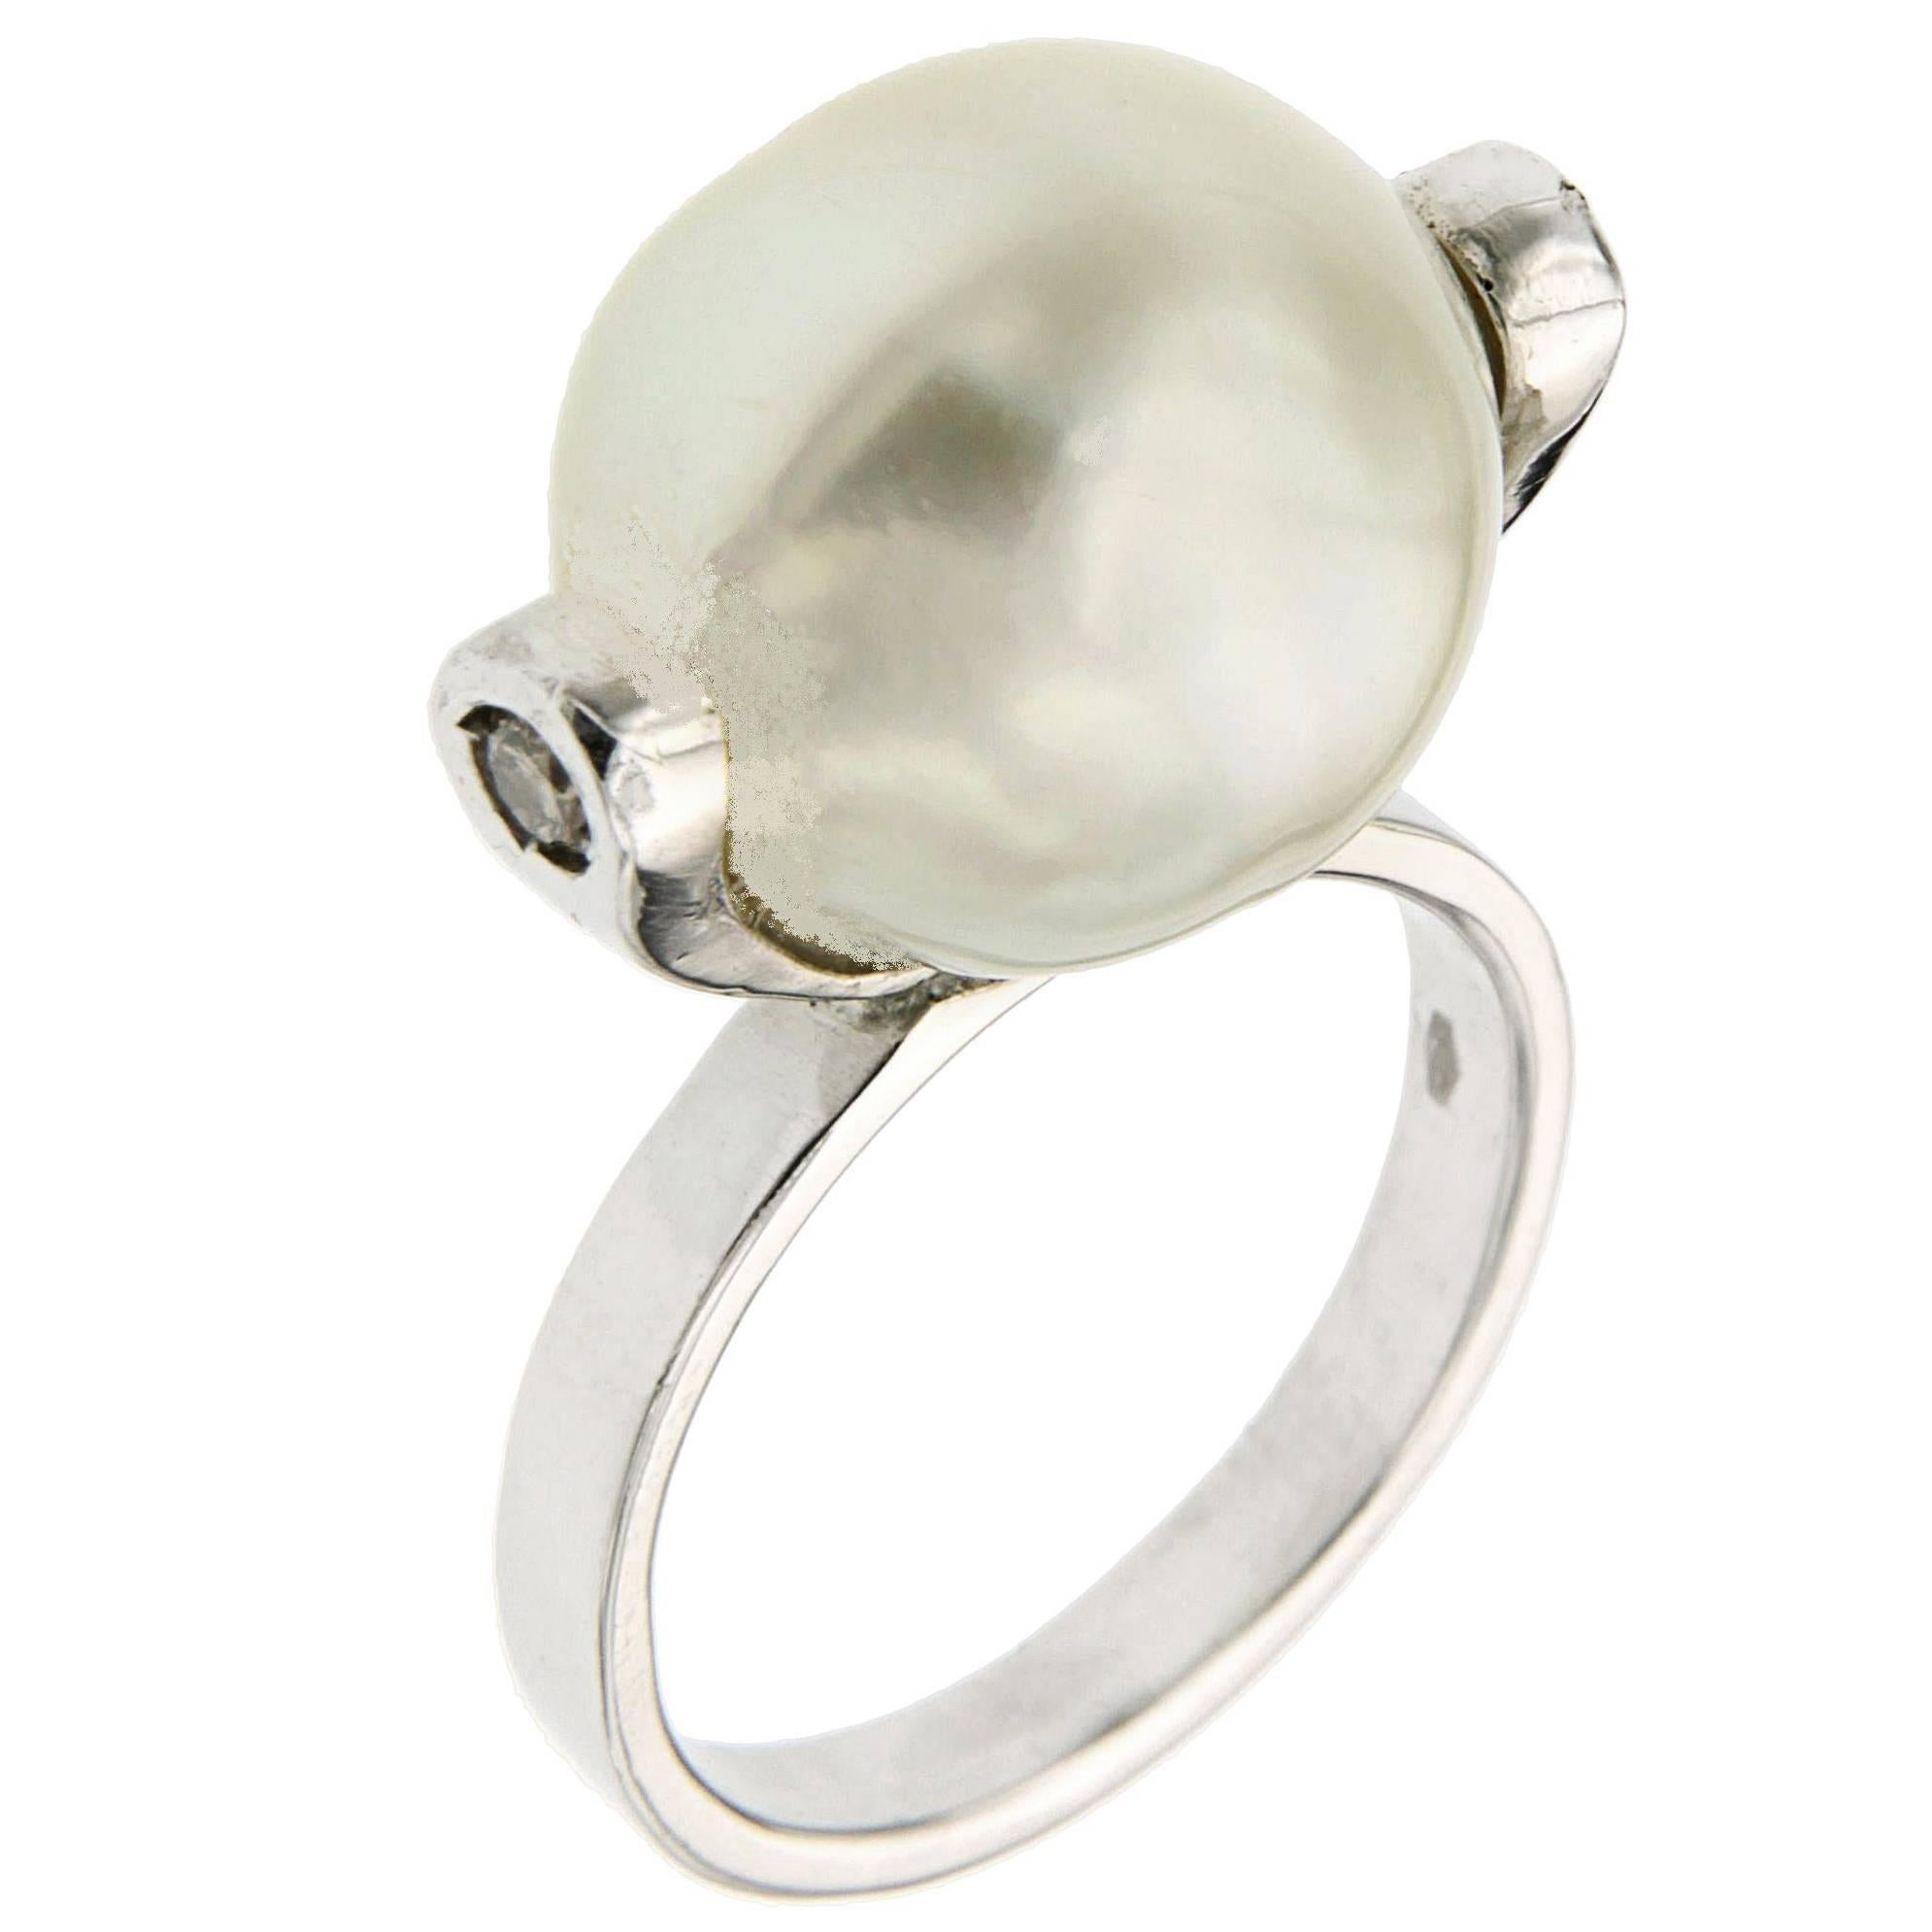 Australian Pearl Diamonds White Gold Ring Handcrafted In Italy By Botta Gioielli